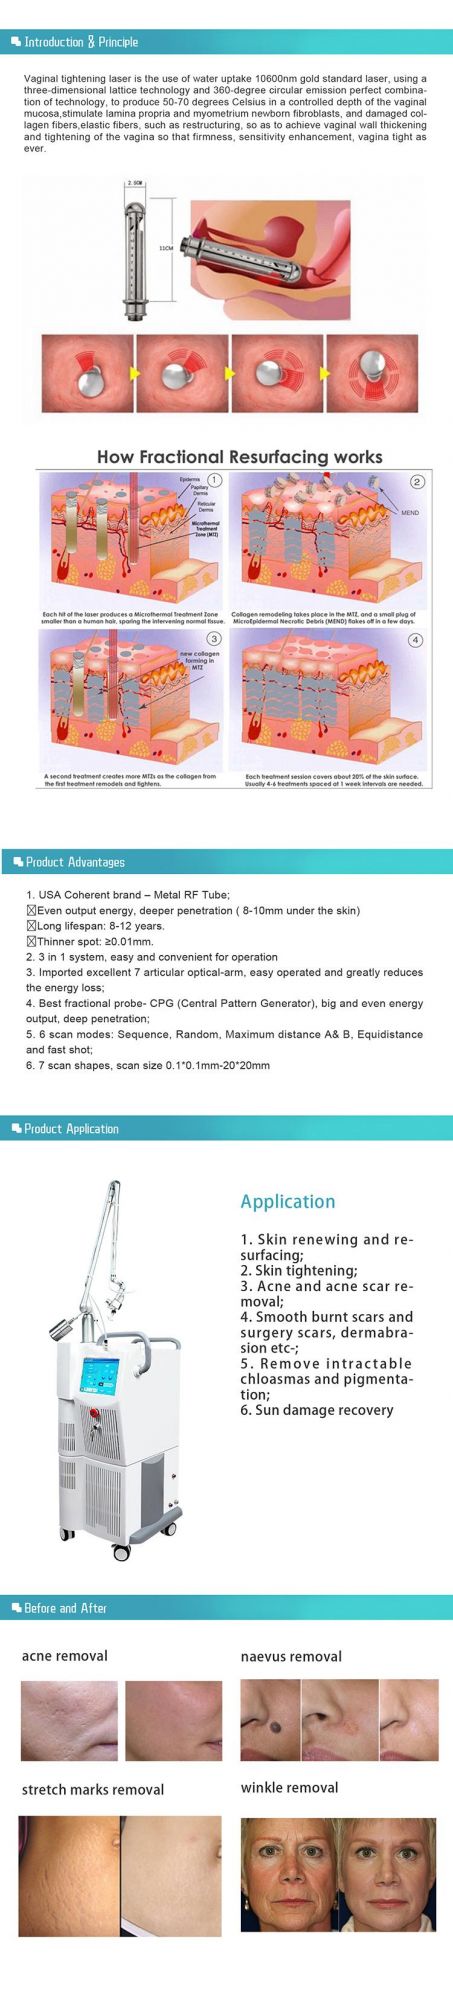 CO2 Laser Machine Vaginal Tightening Scar Removal Skin Tighten Acne Treatment Skin Resurfacing CO2 Fractional Lasers